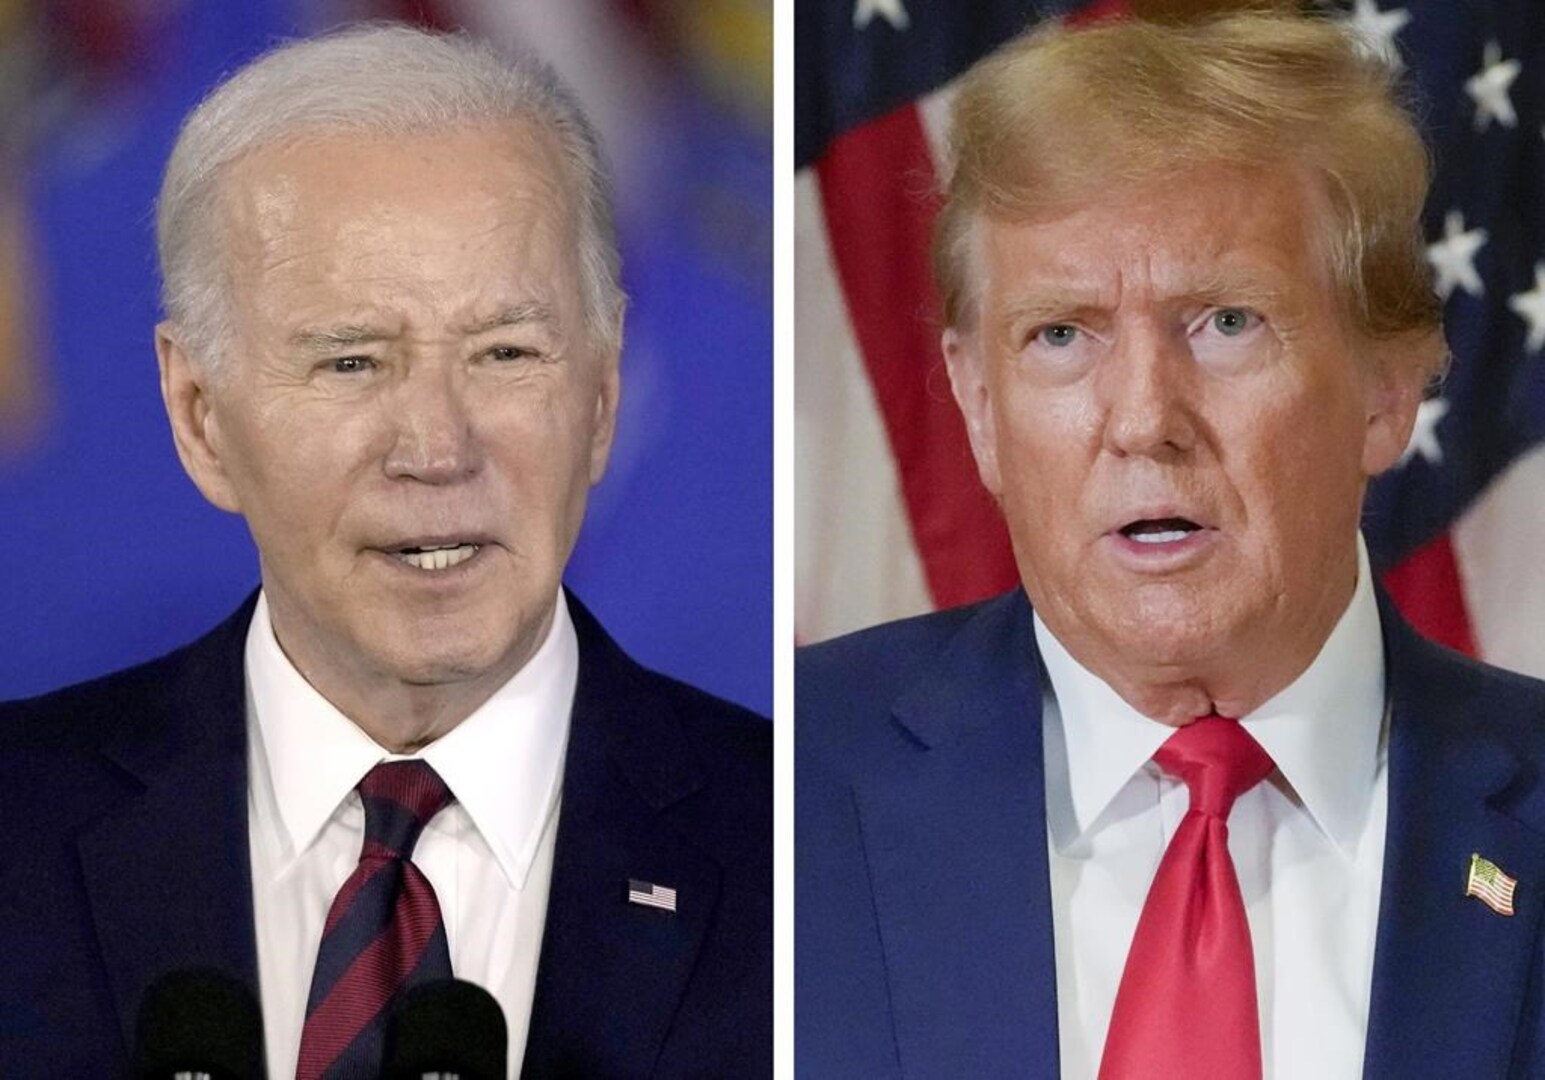 Who's leading the Presidential race: Biden or Trump?